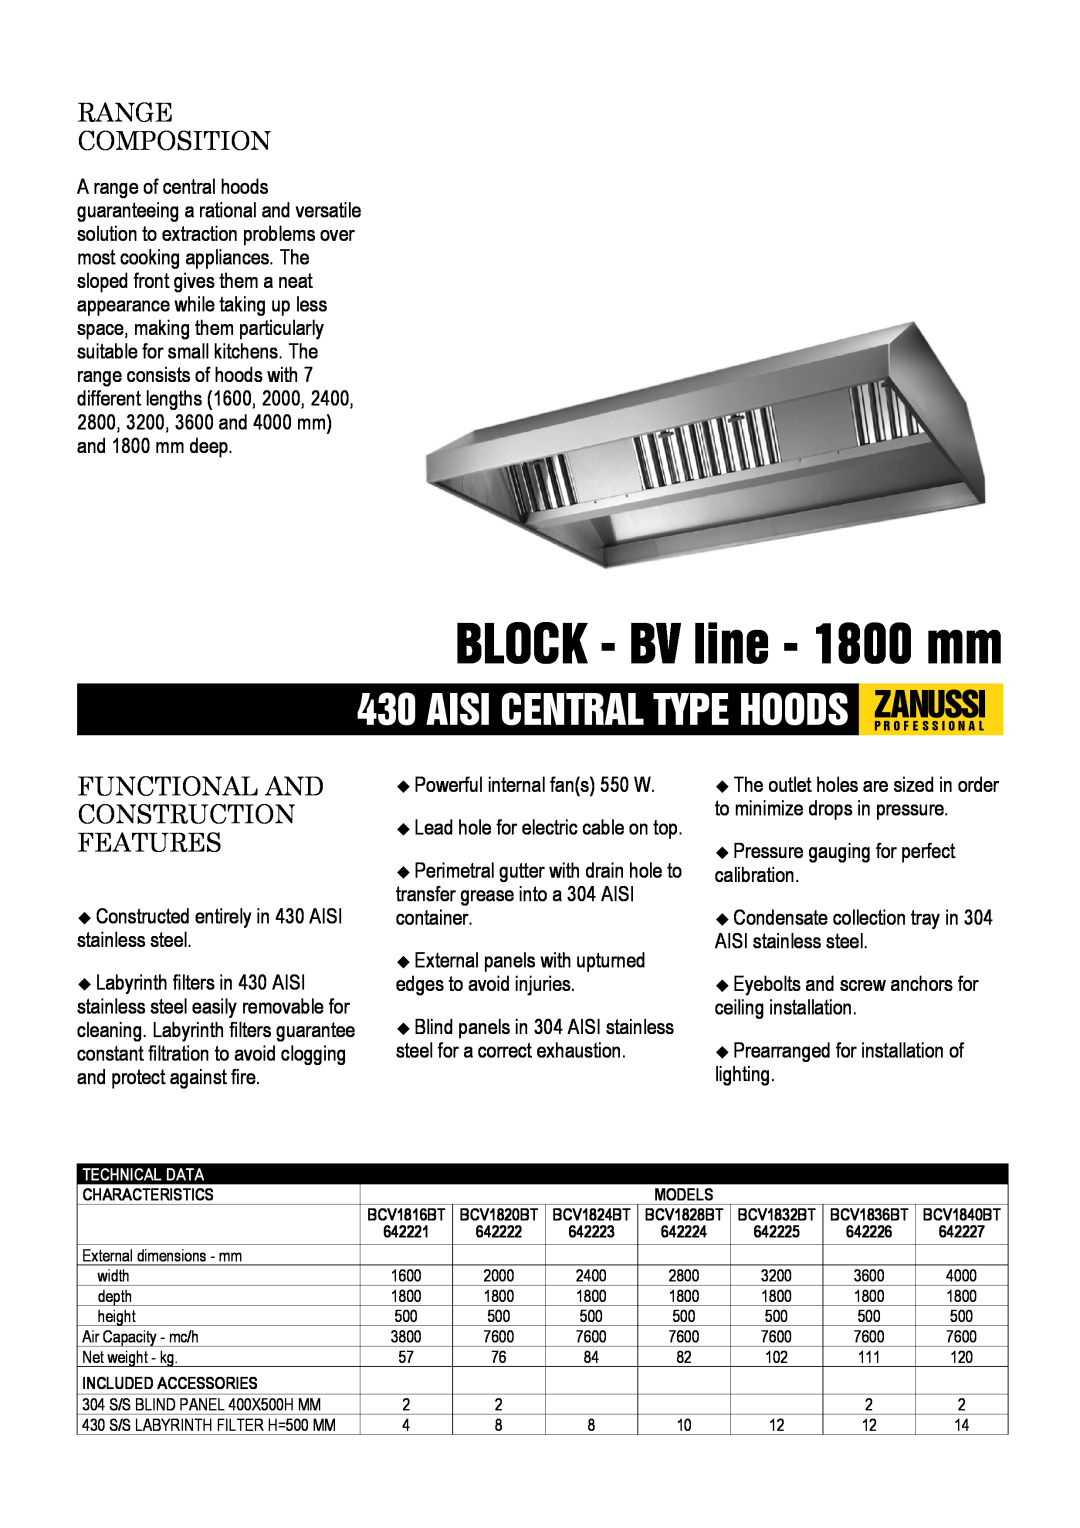 Zanussi 642226, 642221 dimensions BLOCK - BV line - 1800 mm, Range Composition, Functional And Construction Features 